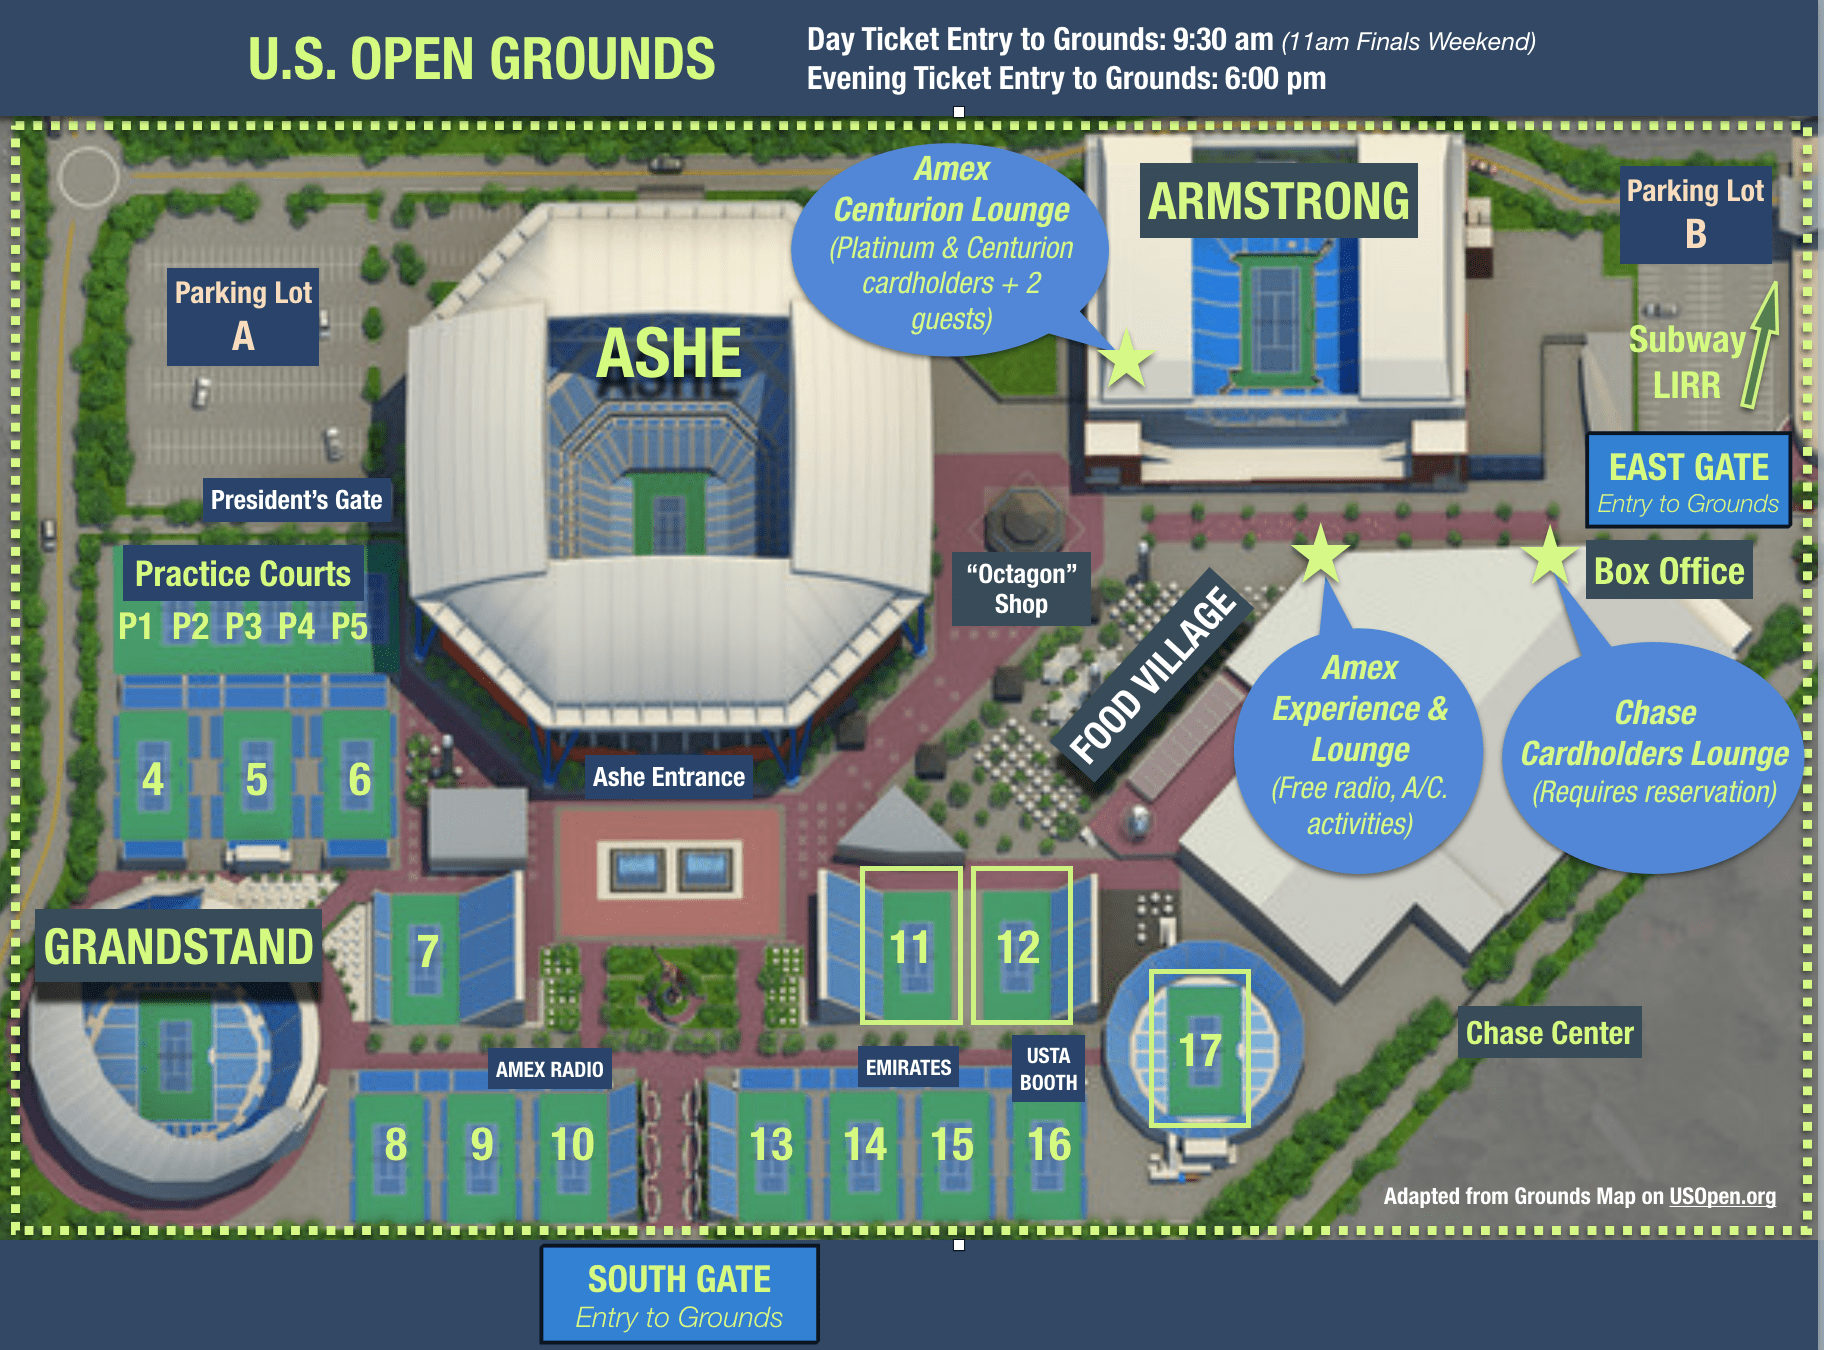 A Serious Tennis Fan S Top 10 Tips For The 2020 Us Open The Road To 4 5 Tennis